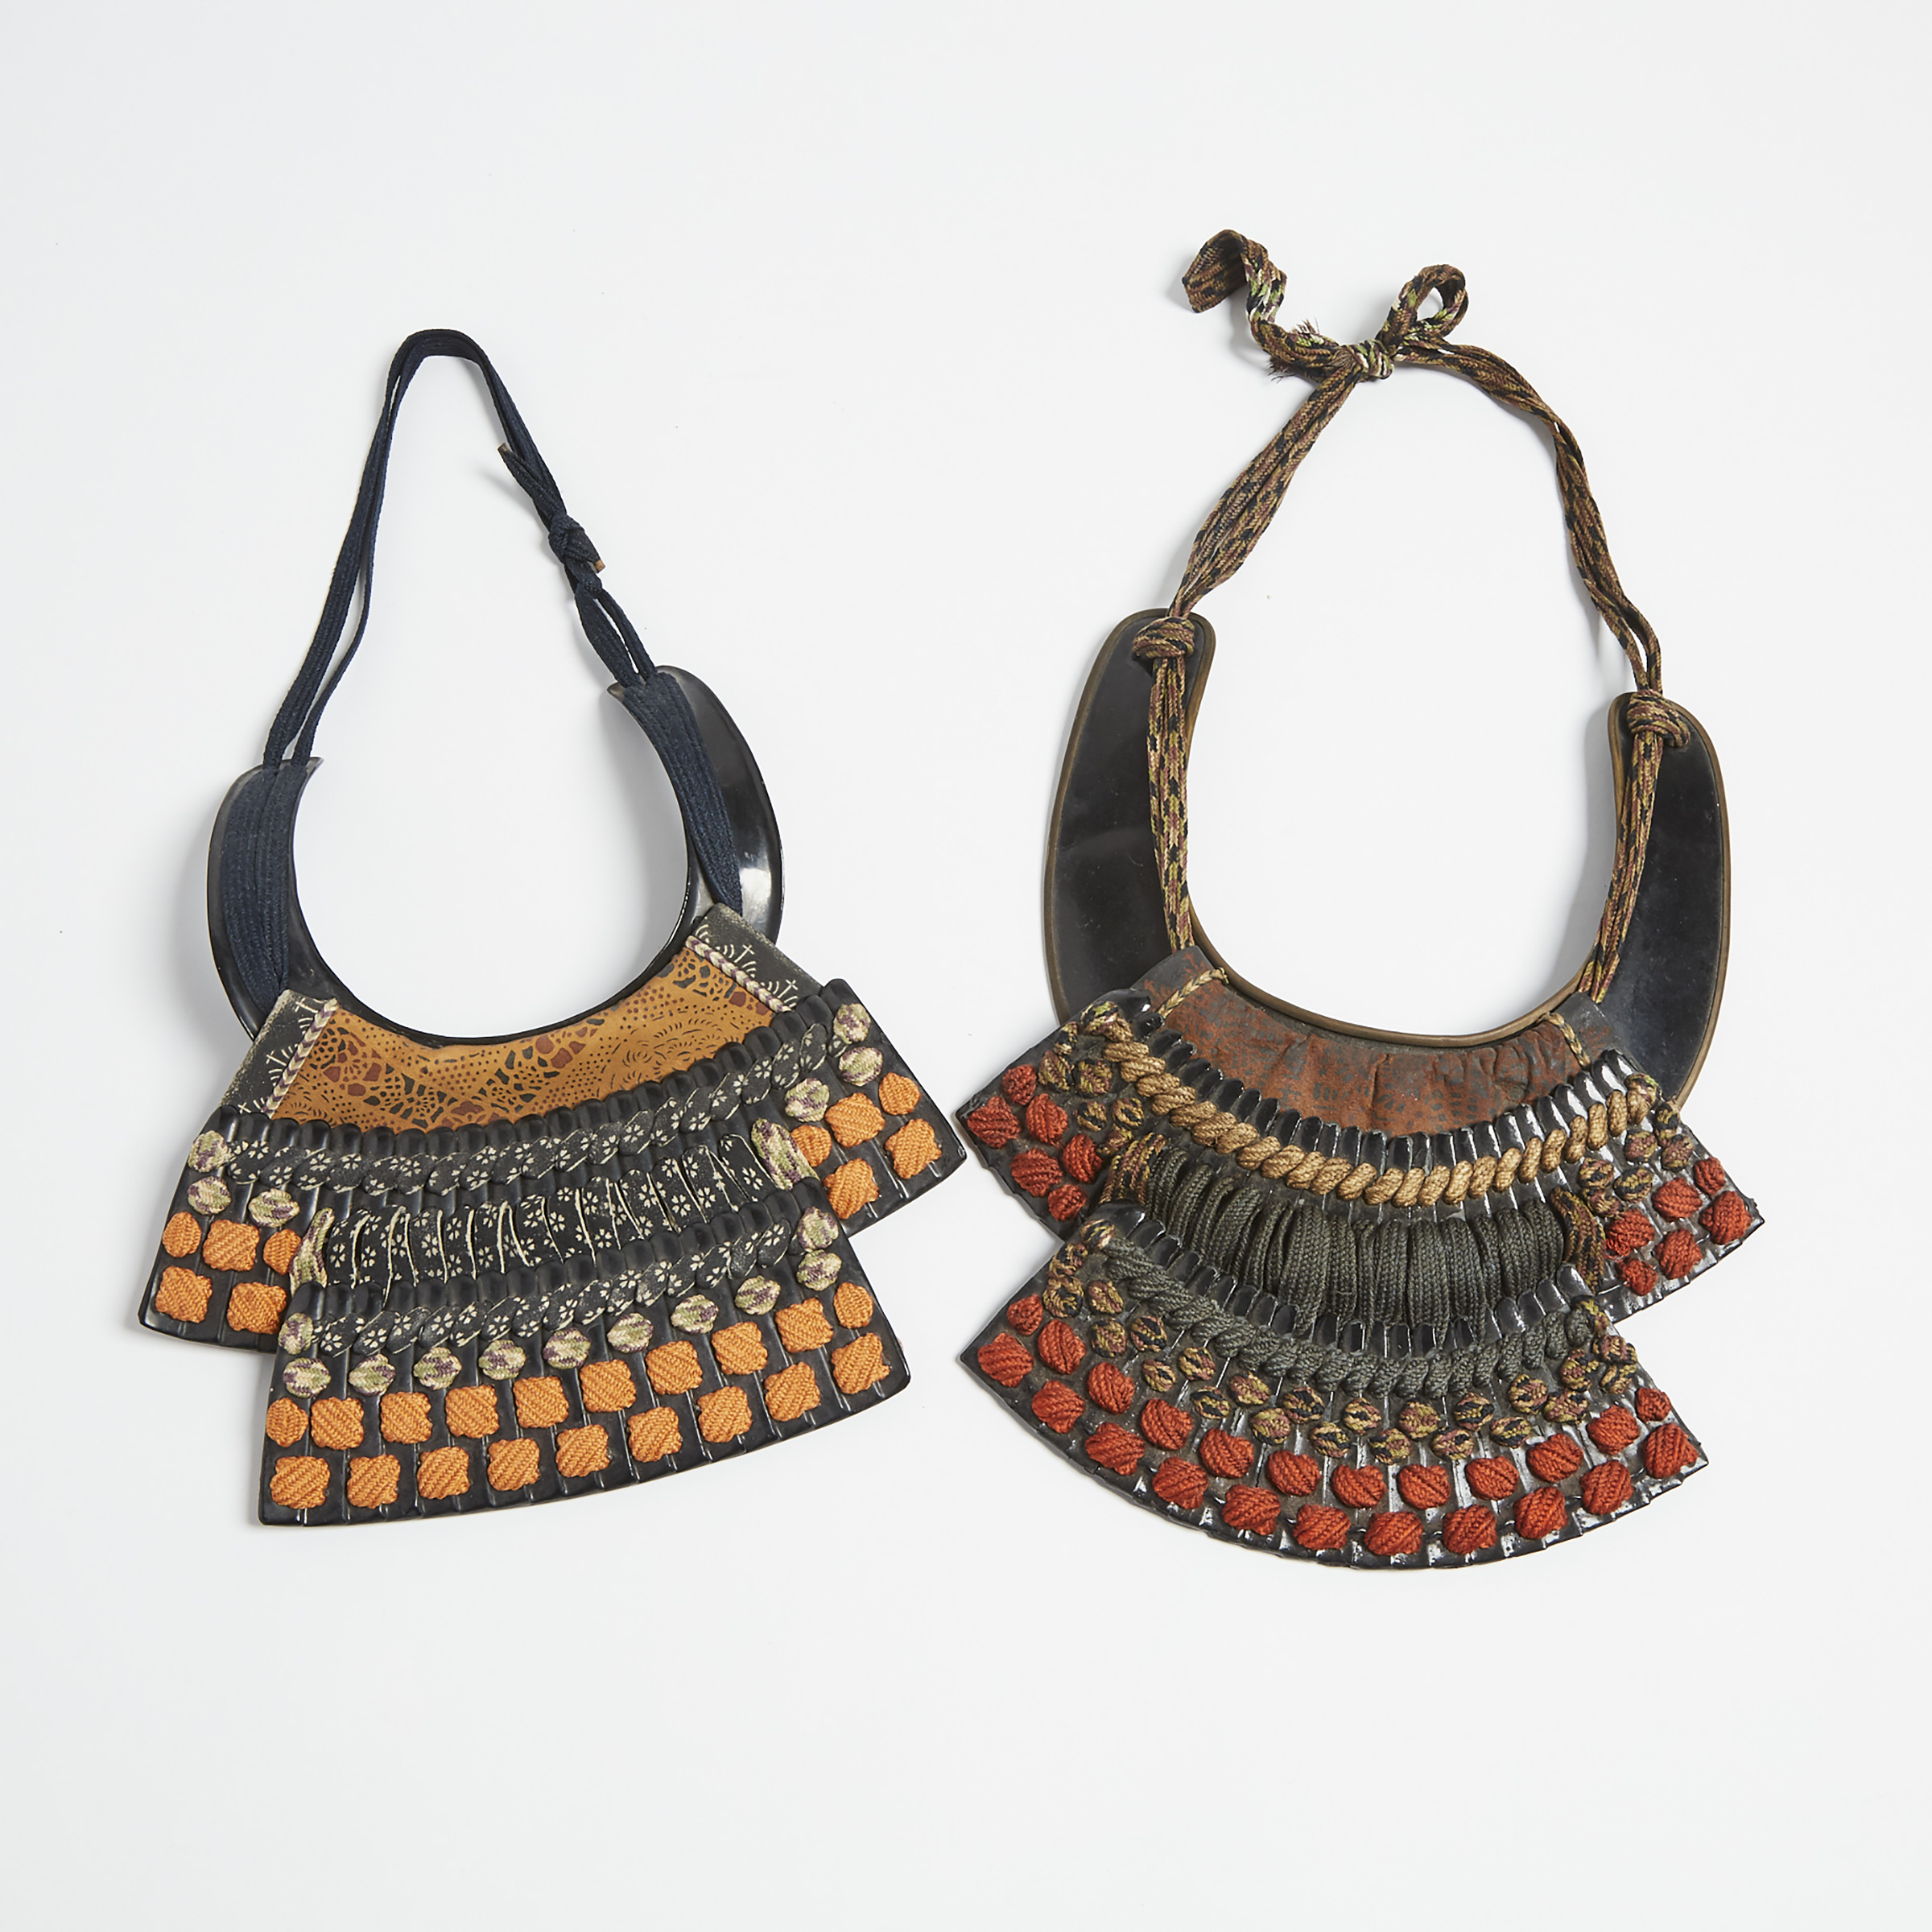 Two Nodowa Armour Neck Guards, Meiji Period and Later